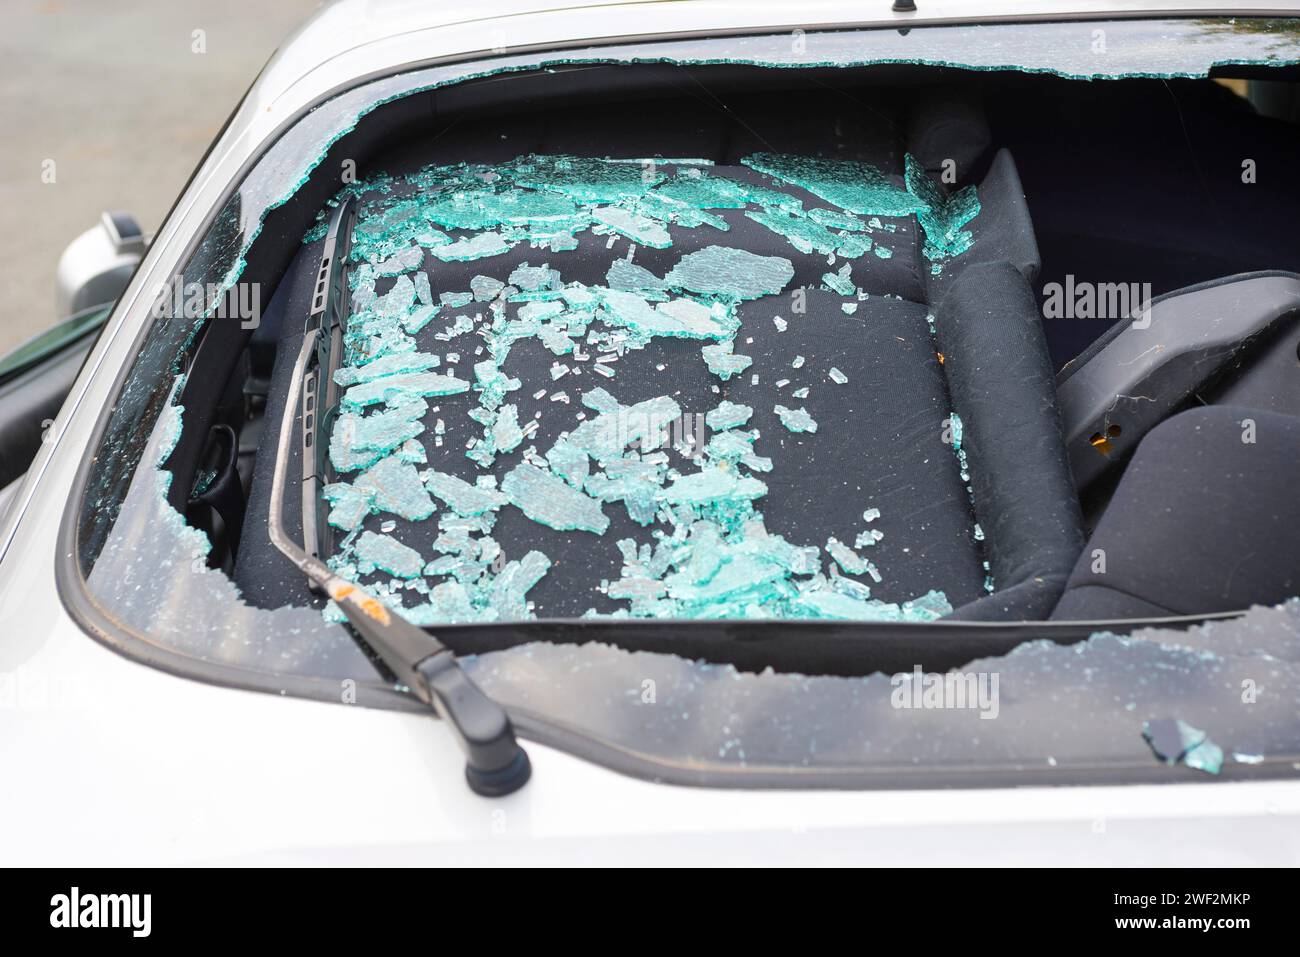 Accident car, sporty car with accident damage standing on a road, broken rear view window of a car with a view of the damaged interior, broken safety Stock Photo